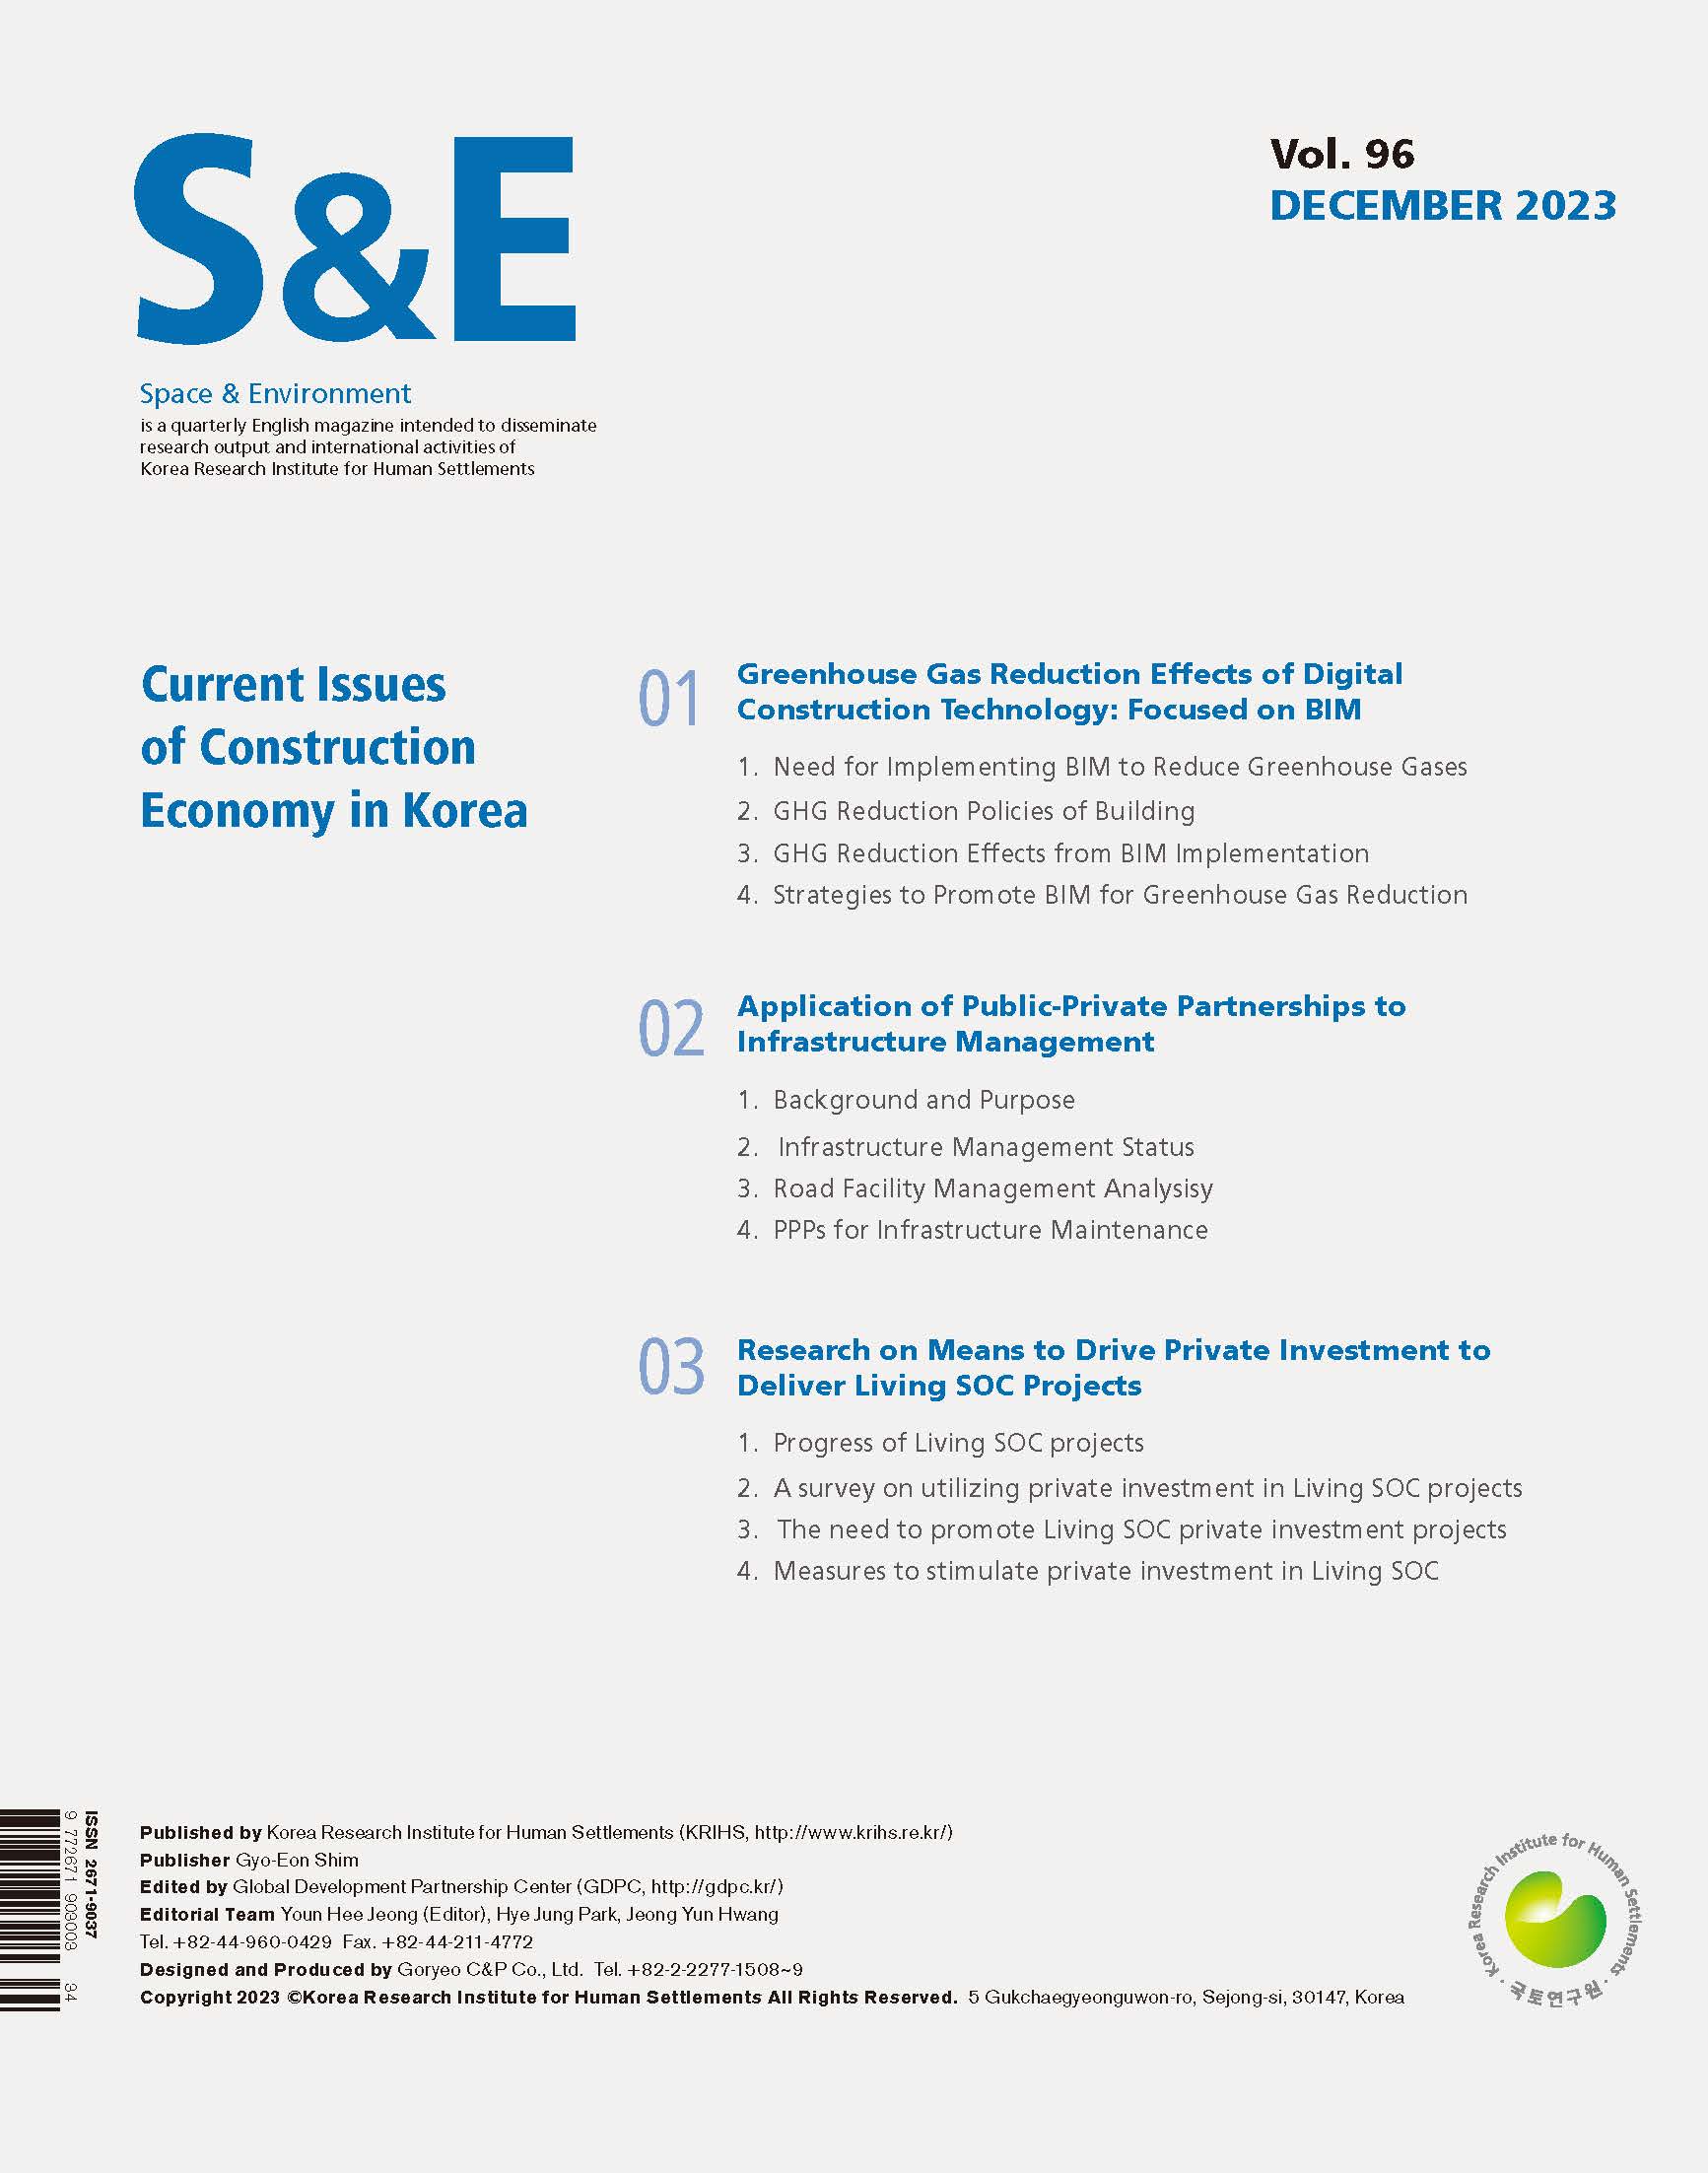 Space & Environment Vol. 96 (December 2023)
Current Issues of Construction Economy in Korea